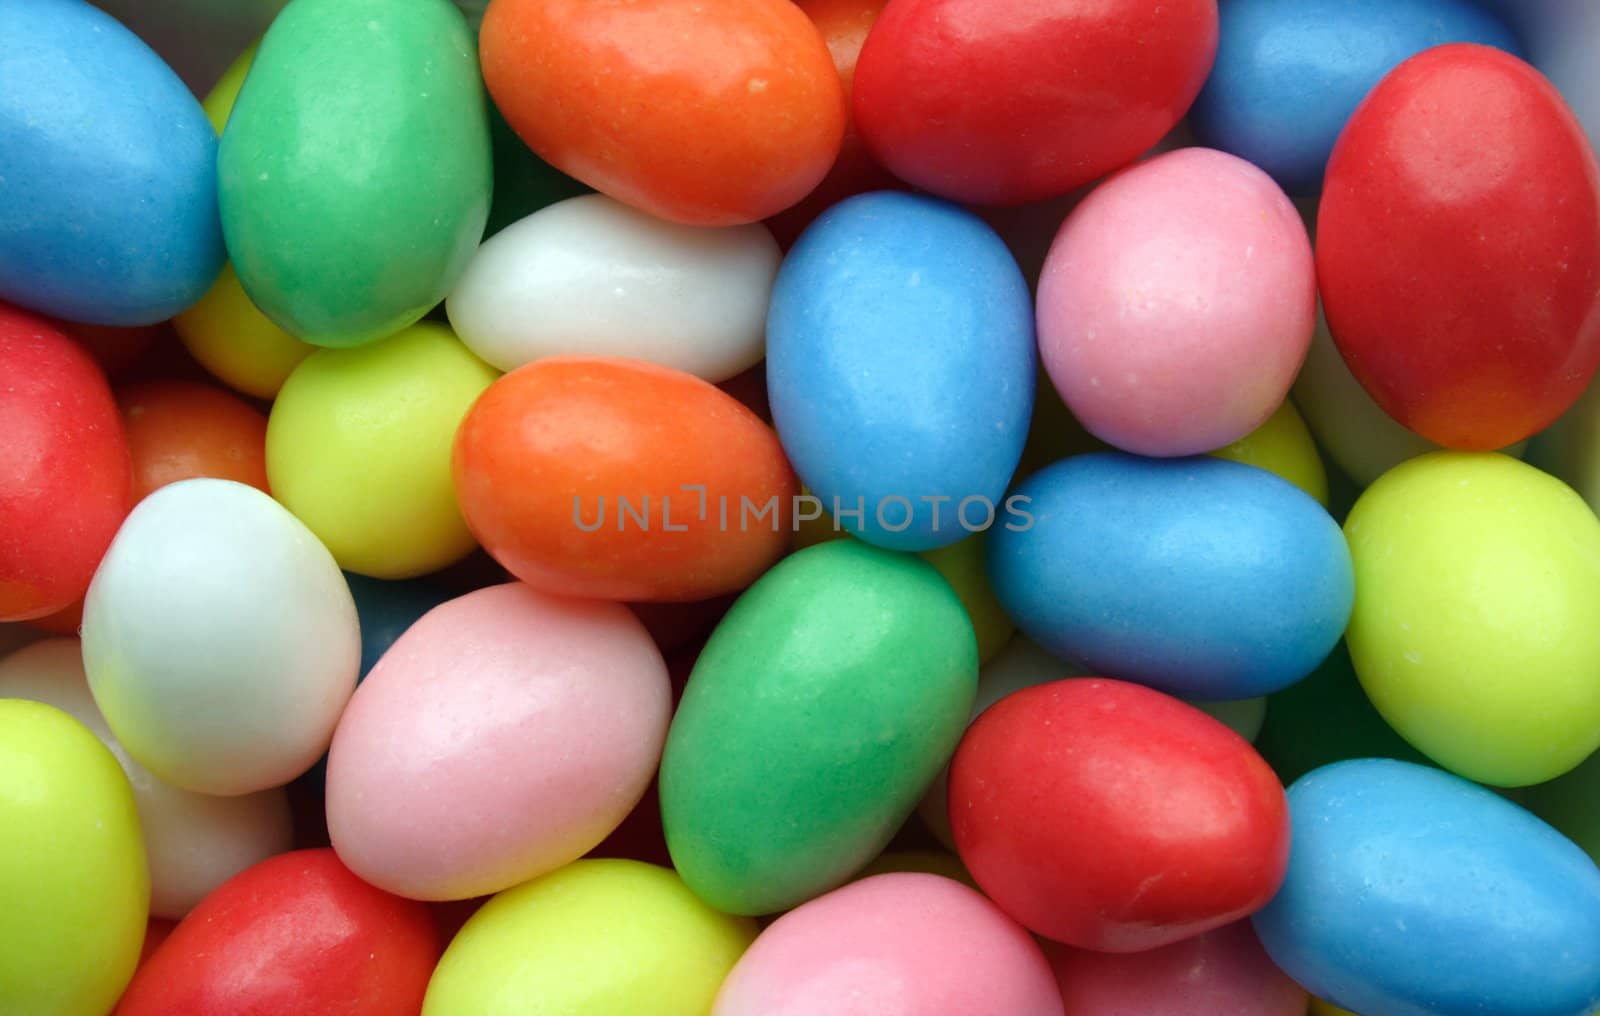 Very colourful candies in easter egg shape. Extremely unhealthy, but so tasty and colourful.